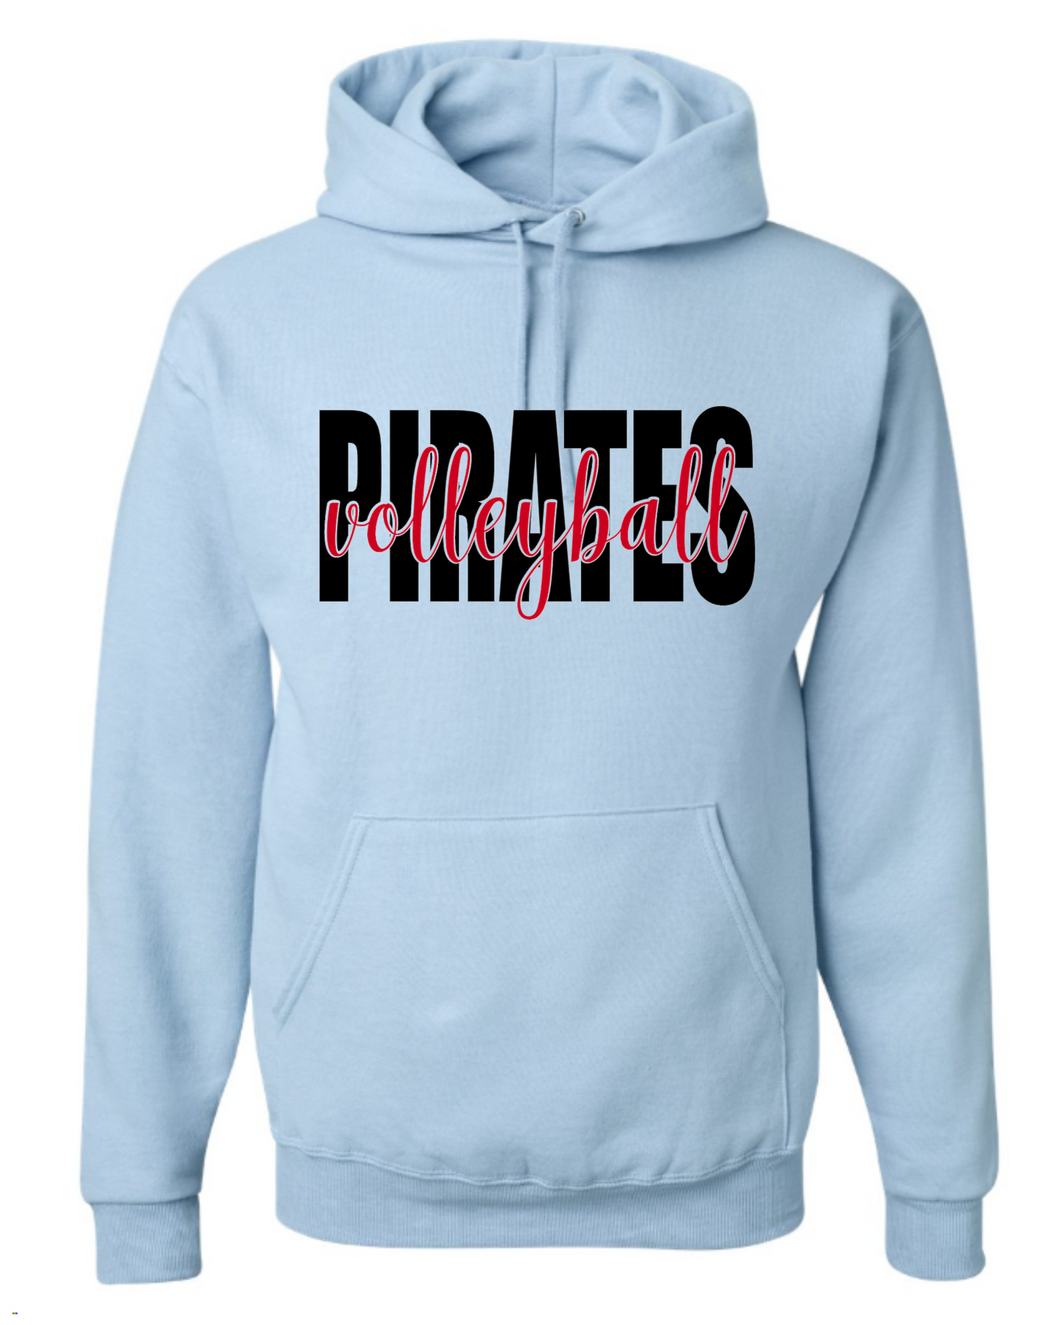 Pirates volleyball hoodie